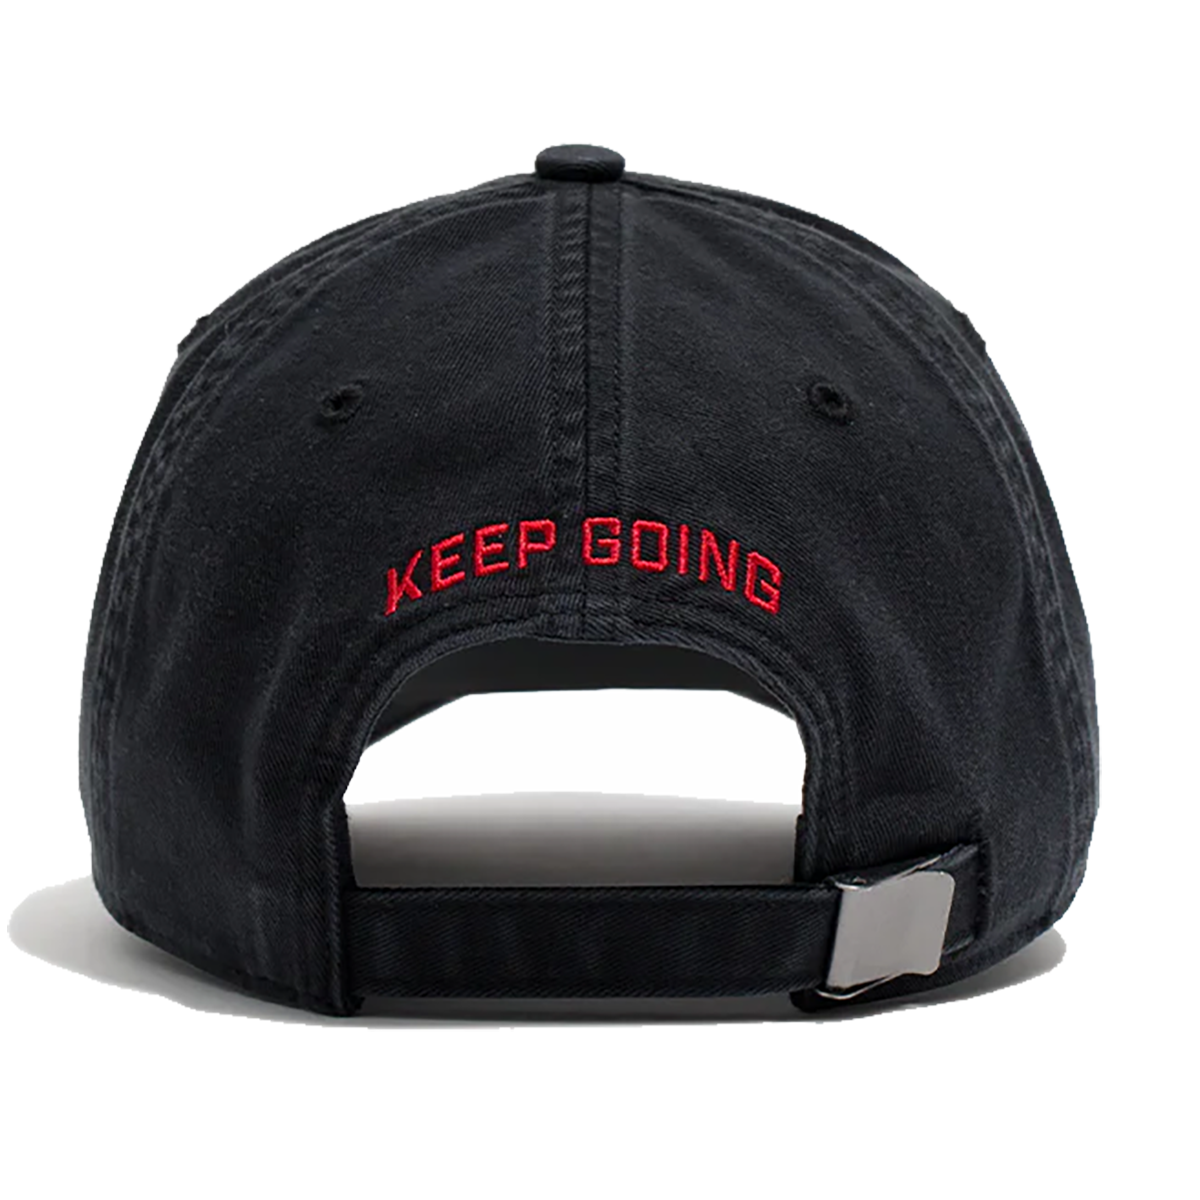 TB12 Keep Going Adjustable Hat, , large image number null